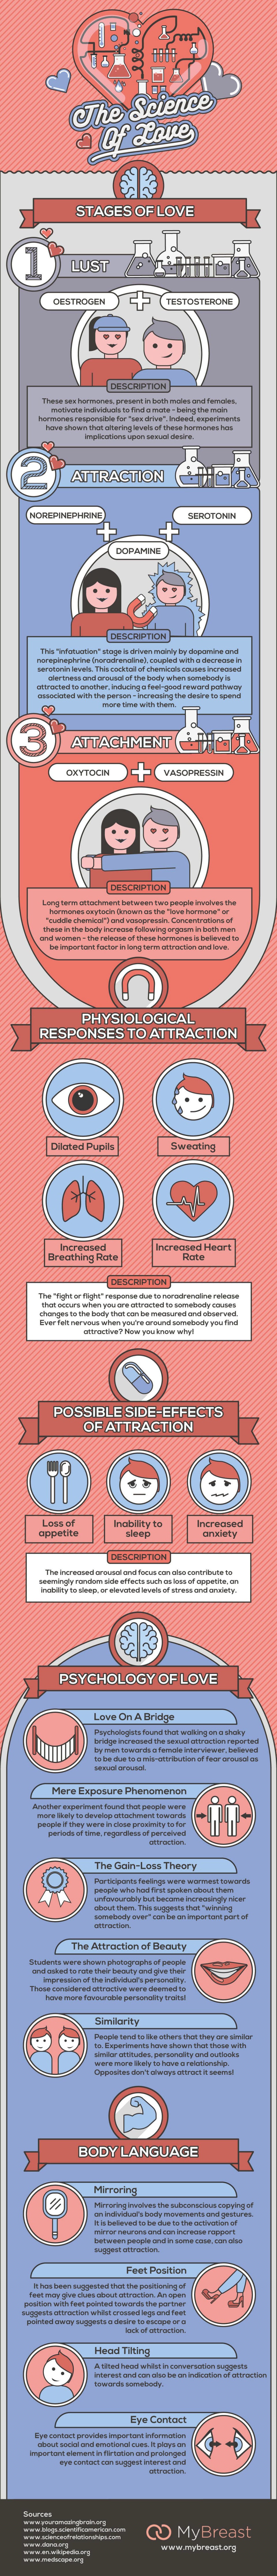 The Science of Love Infographic